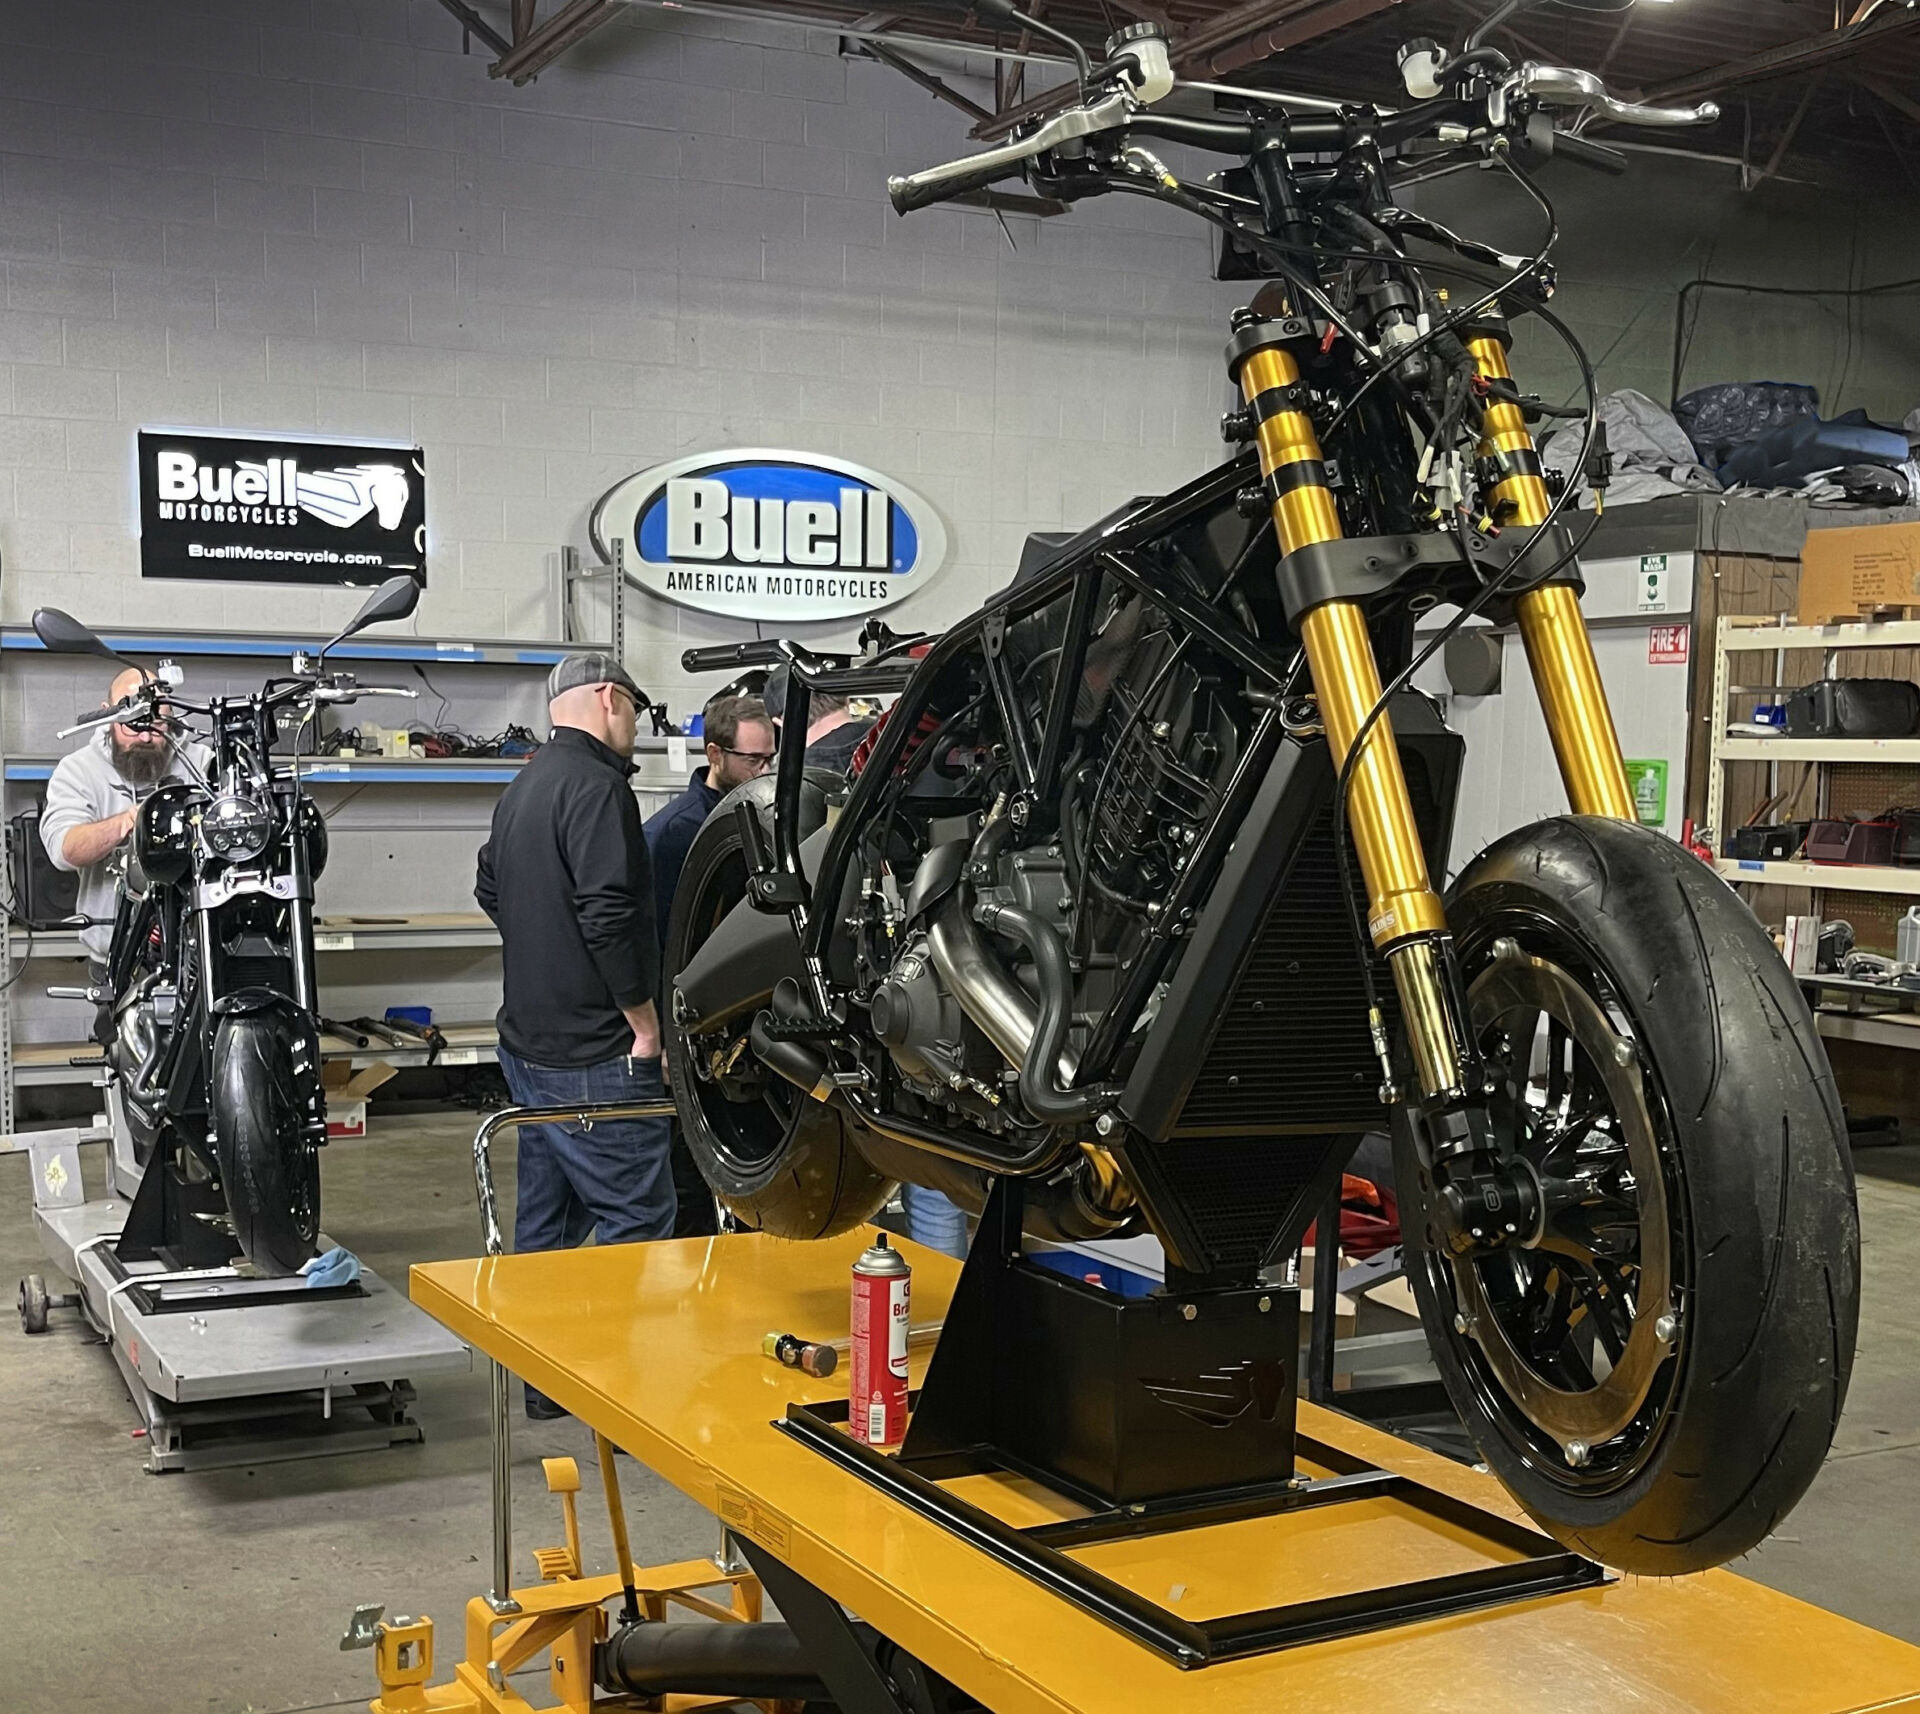 Buell Super Cruiser prototypes being prepared at the factory in Michigan, before heading to Daytona Bike Week. Photo courtesy Buell Motorcycles.